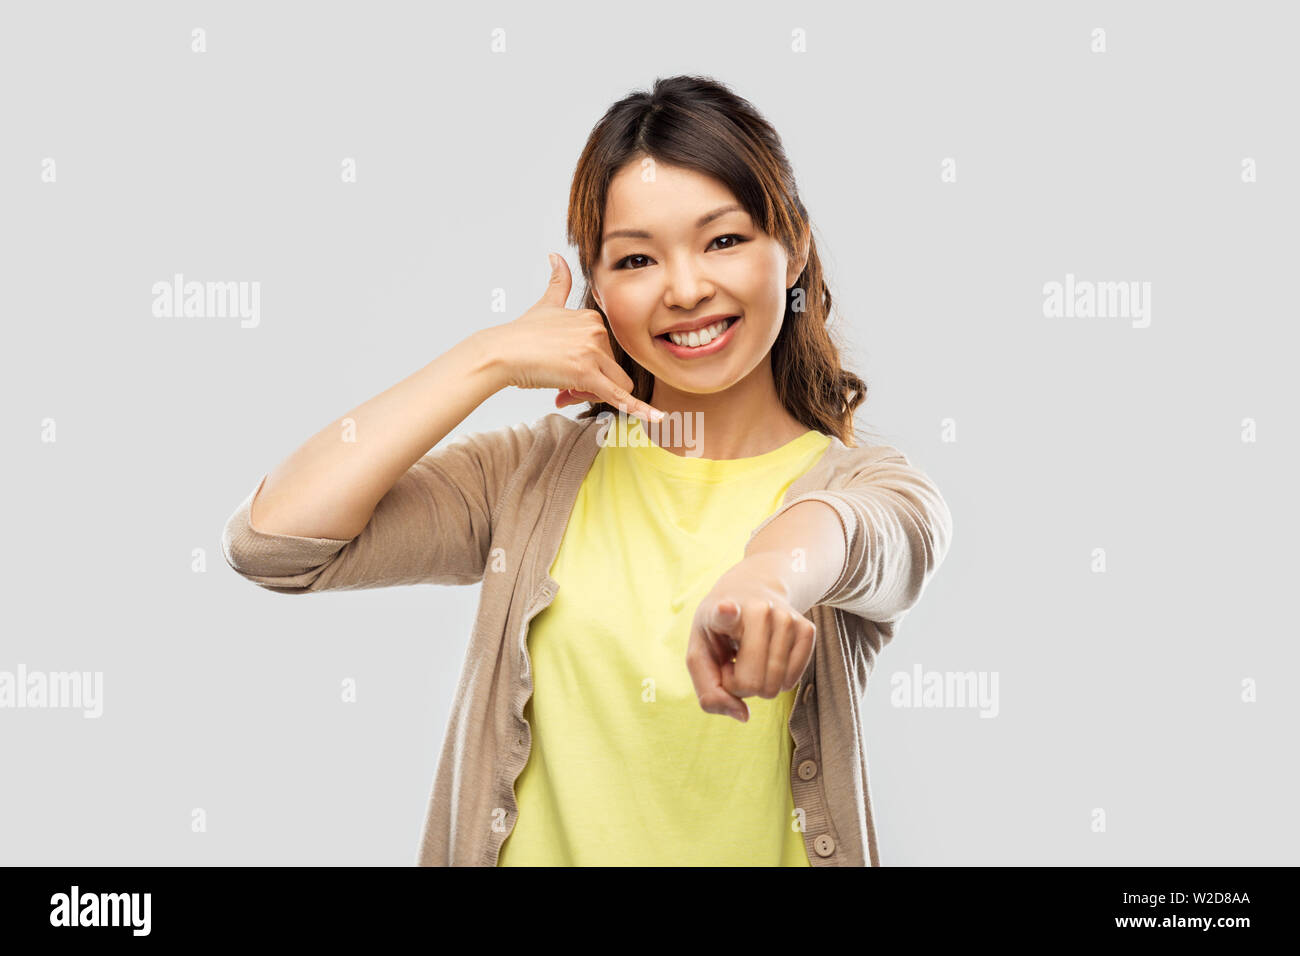 african asian making phone call gesture Stock Photo